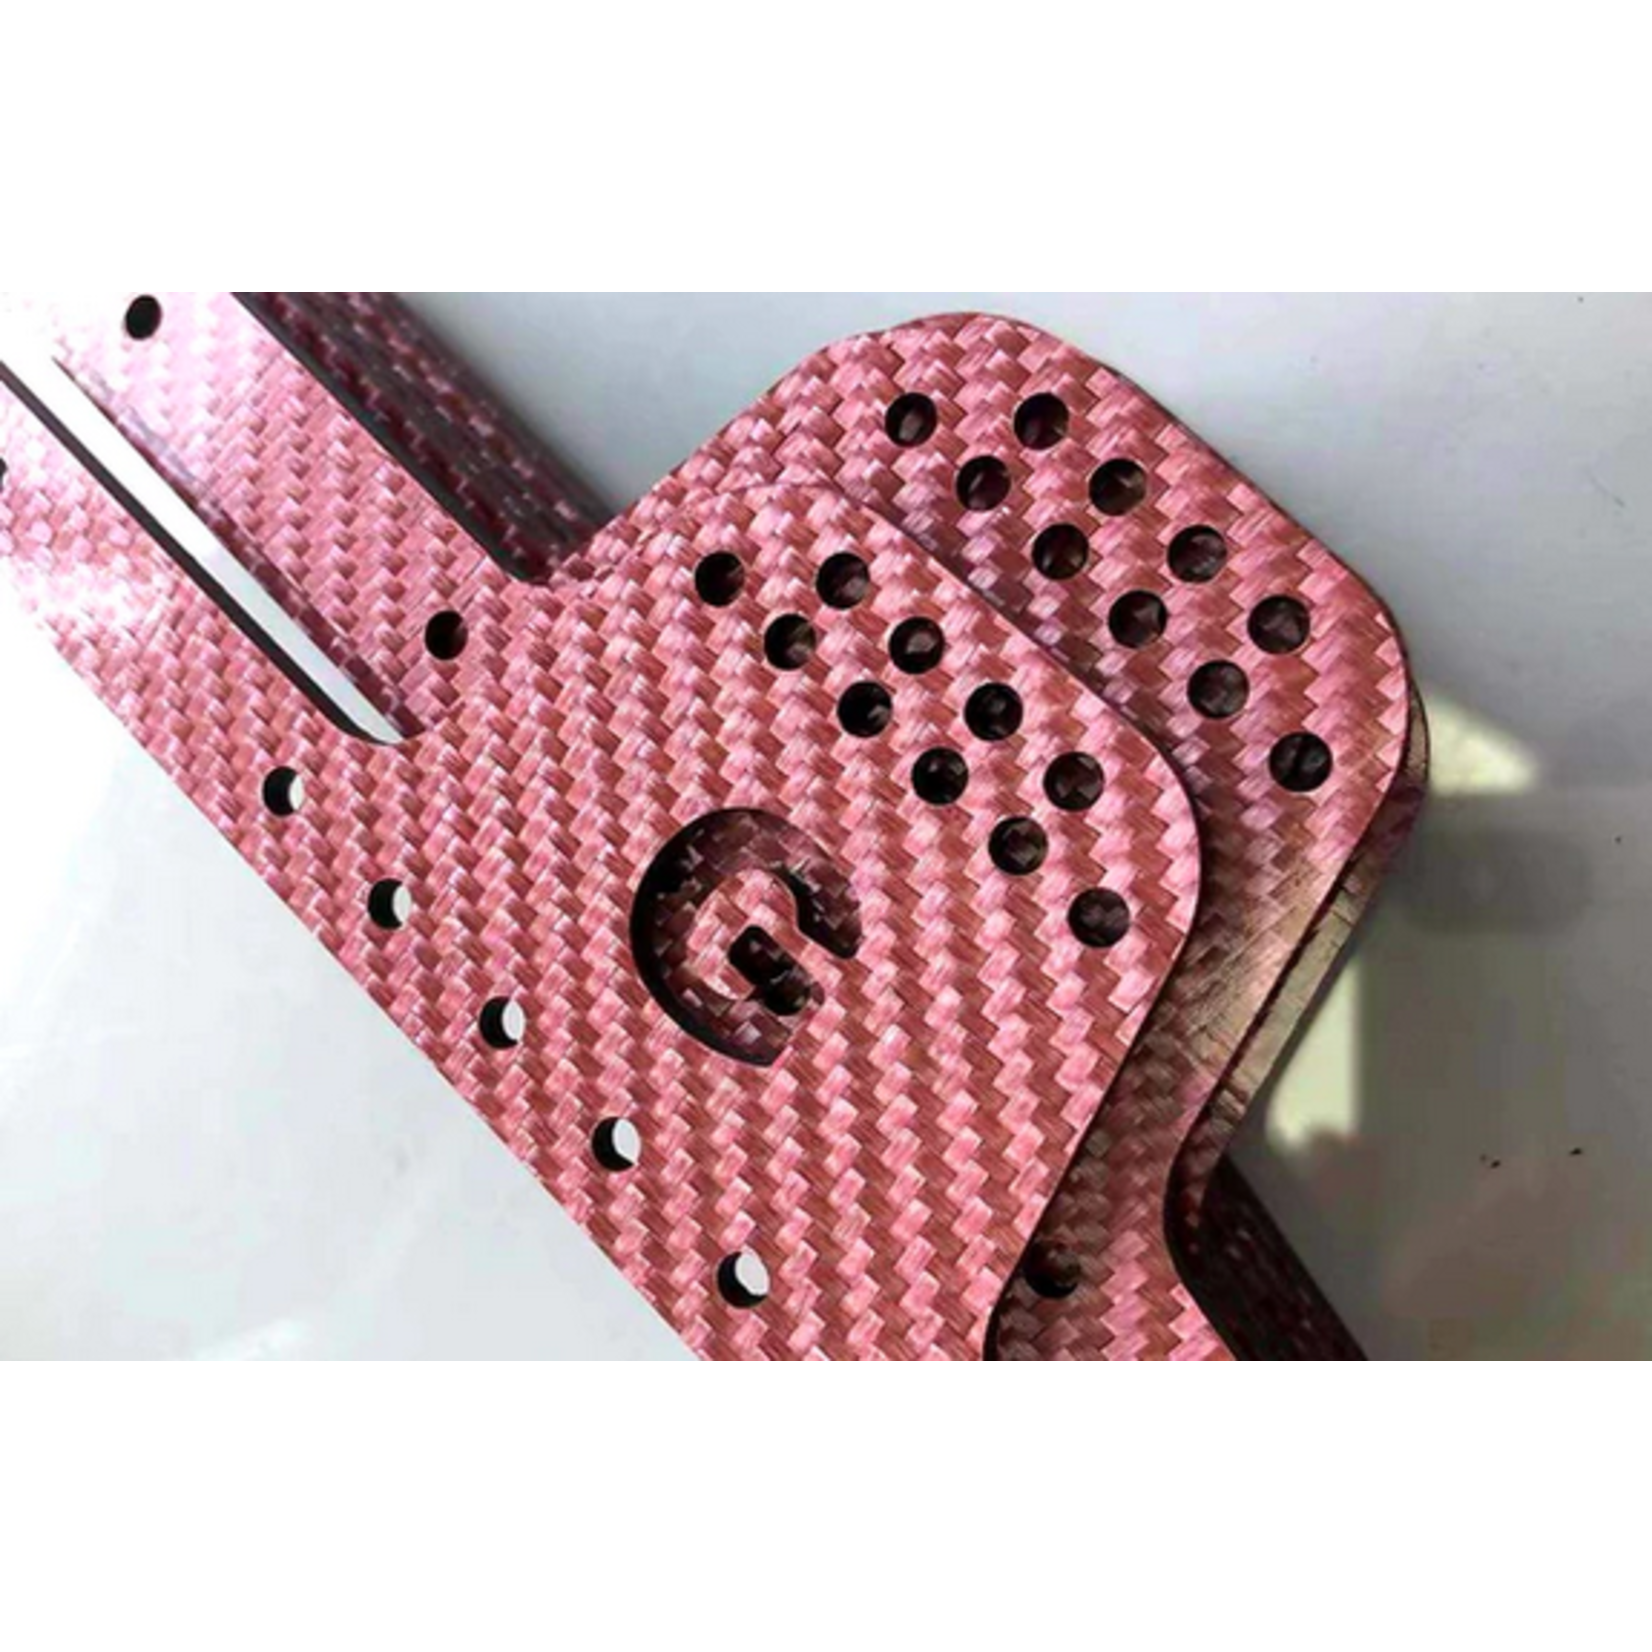 Team G-Speed GSPEED TGH-V3 Carbon Fiber Chassis Rails in Pink #CF-Pink